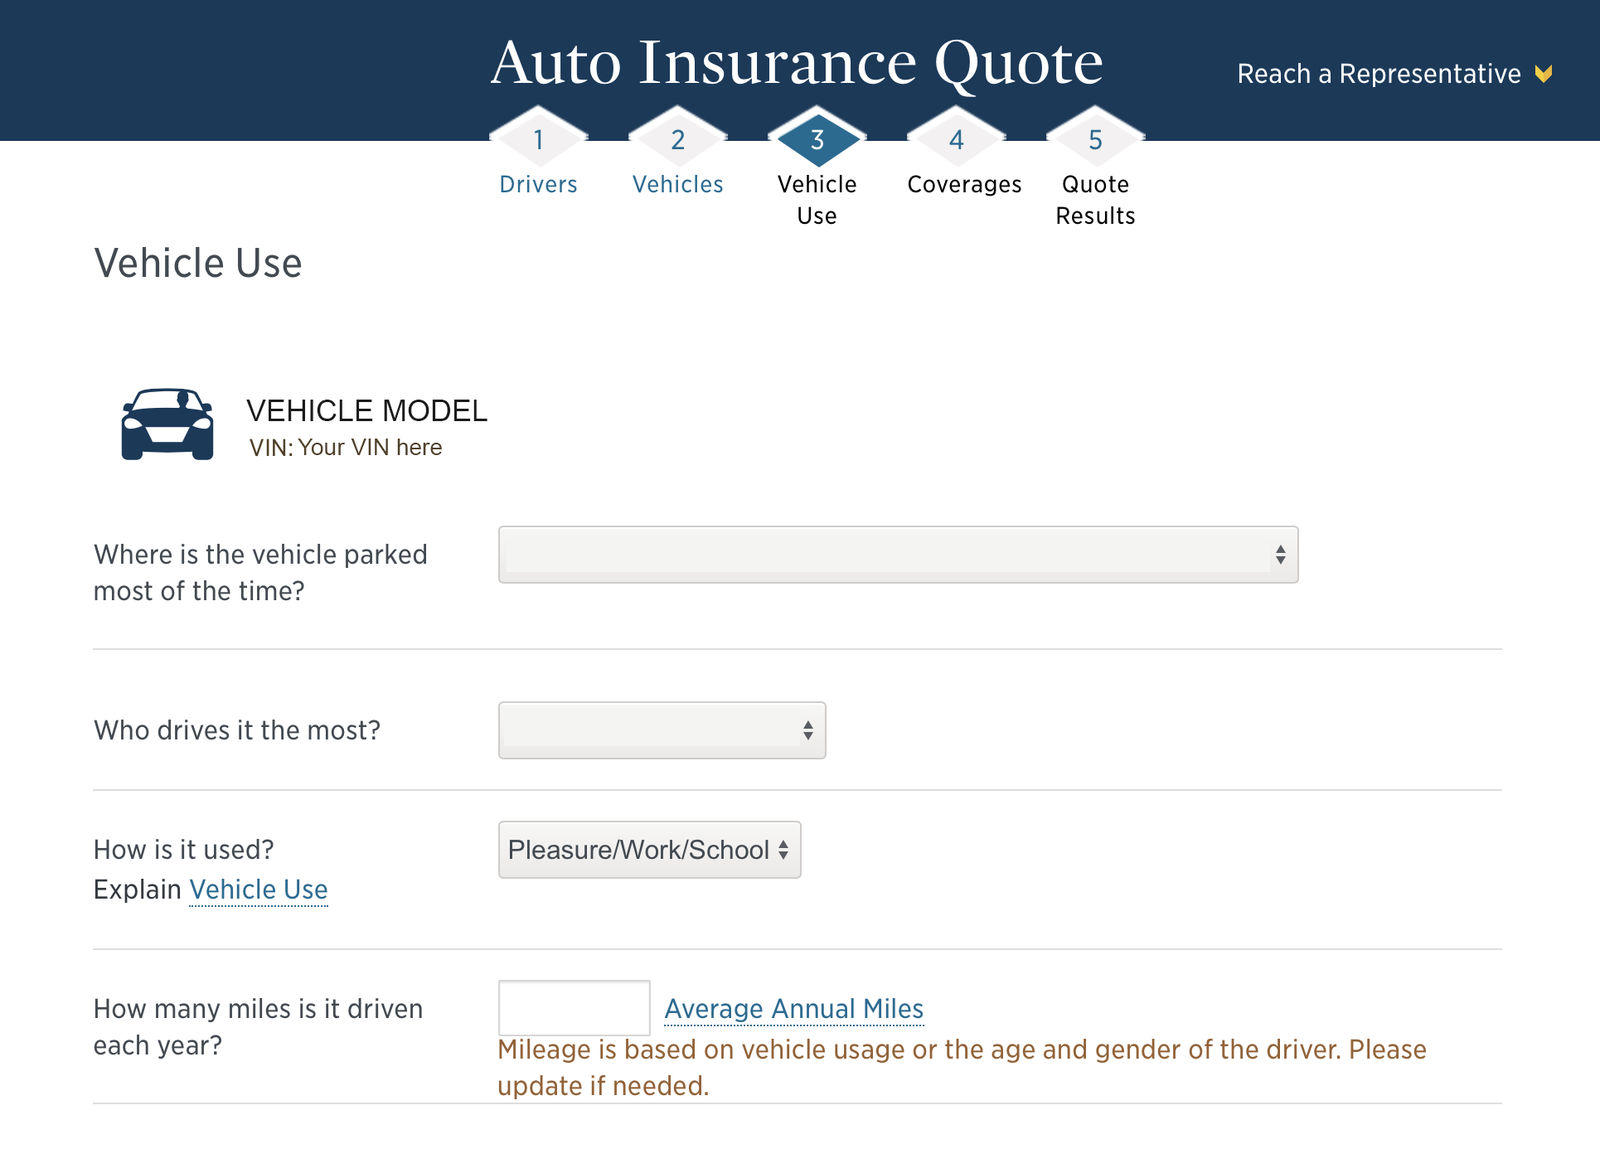 USAA quote vehicle use